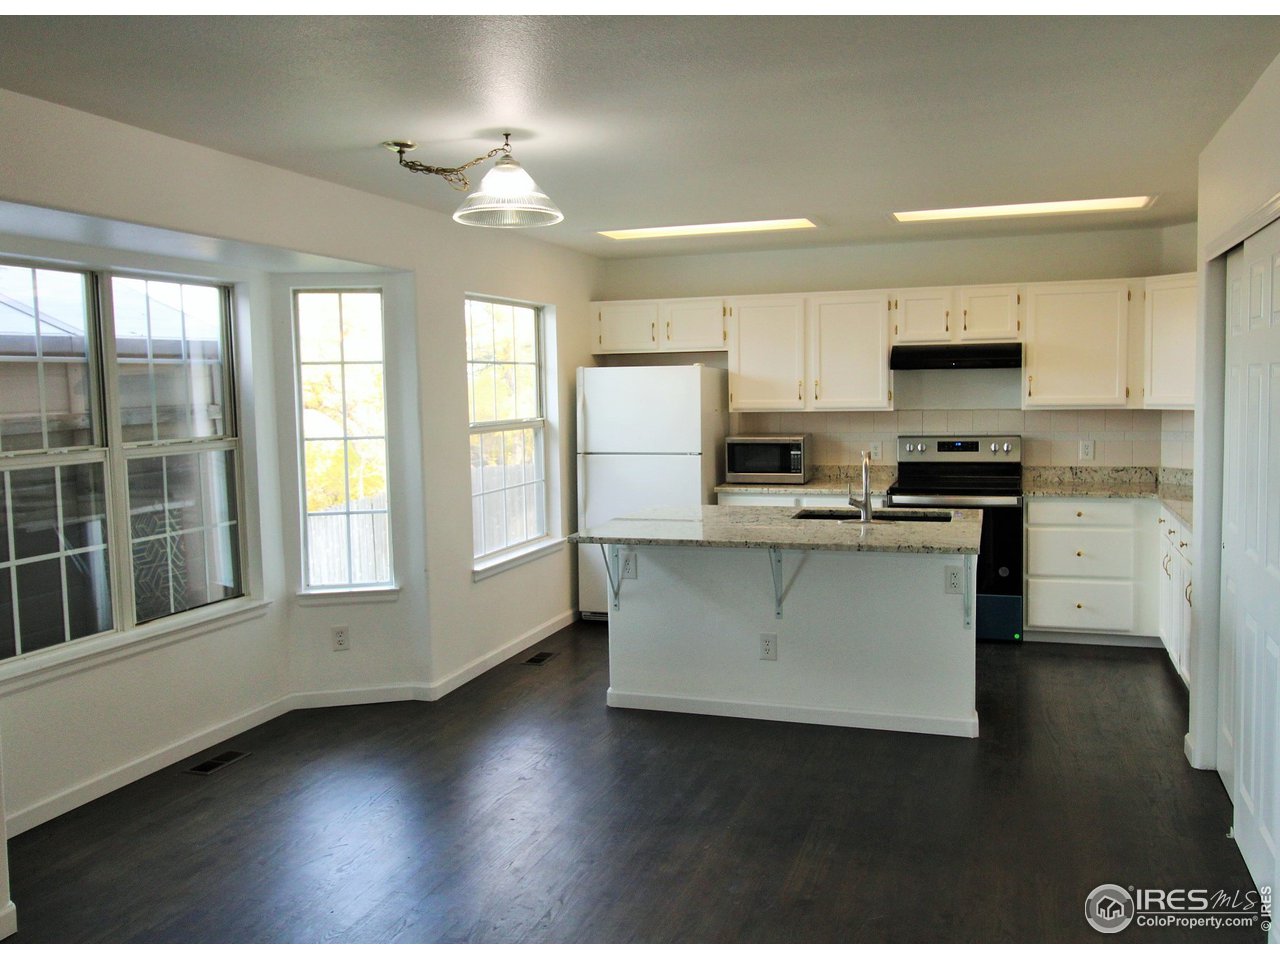 Spacious kitchen with breakfast nook measures 17'3